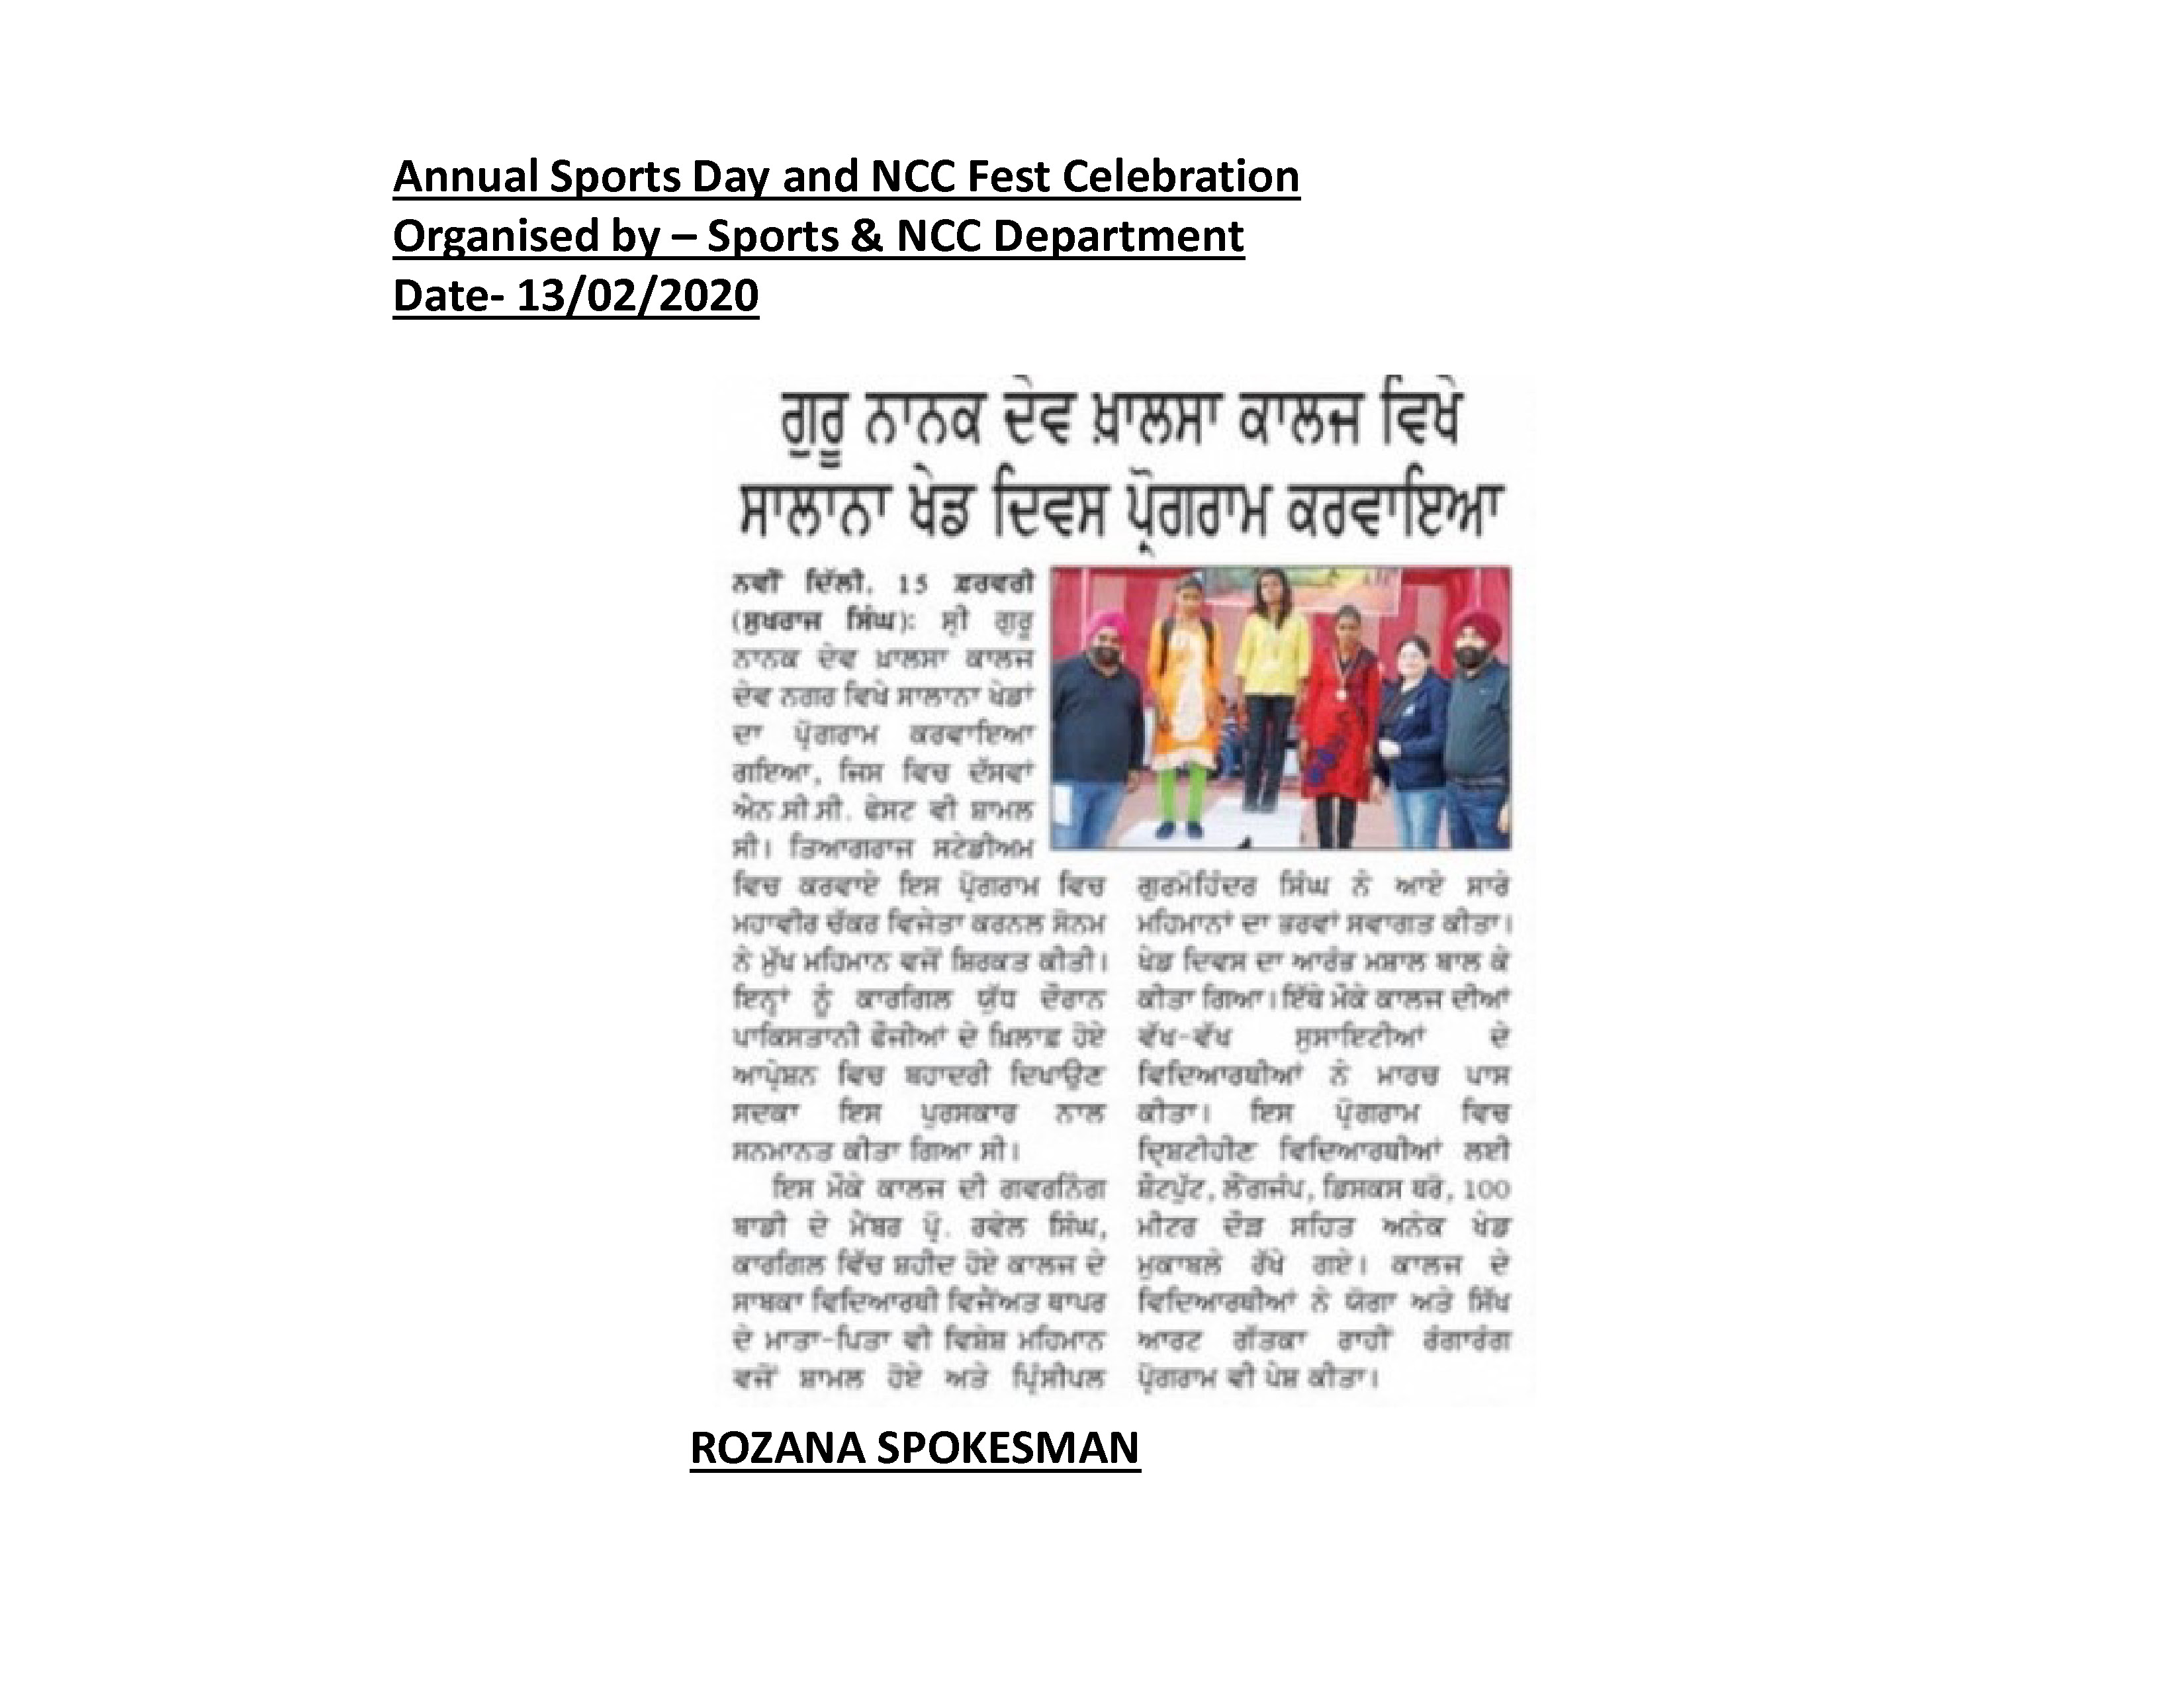 images/mediaspeaks/press clipping_Page_22.jpg